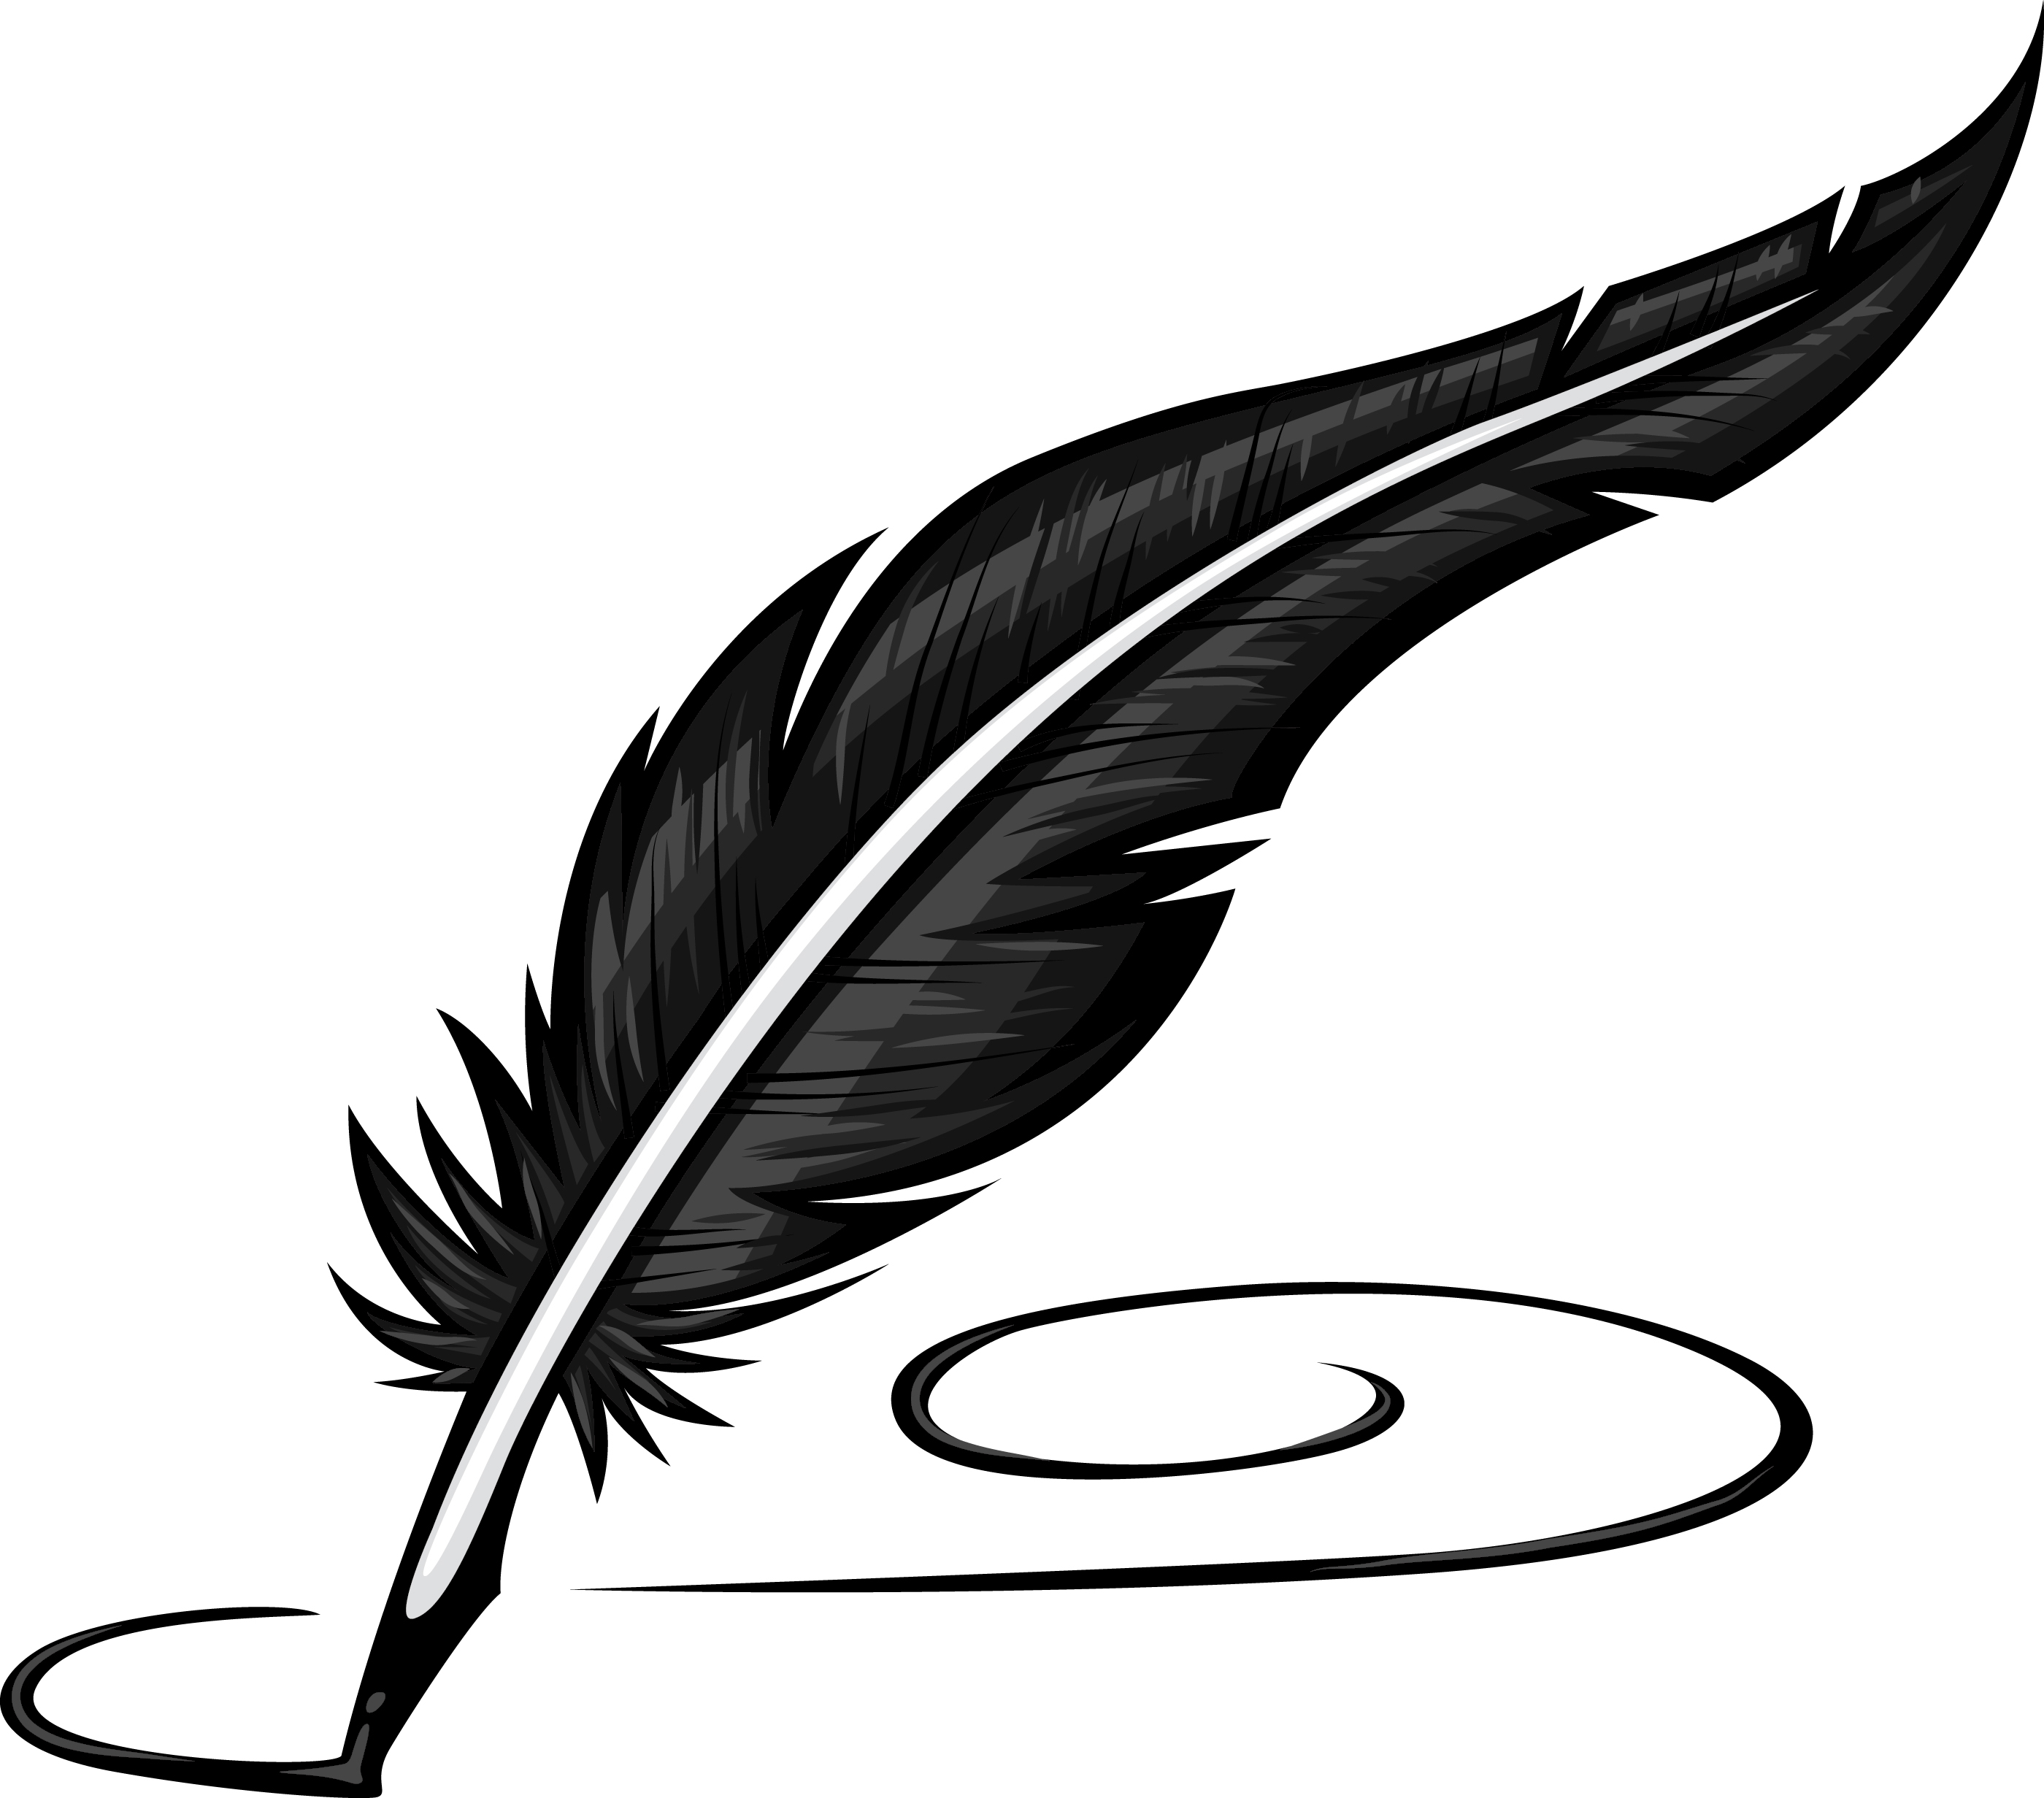 Ink bottle and quill clipart